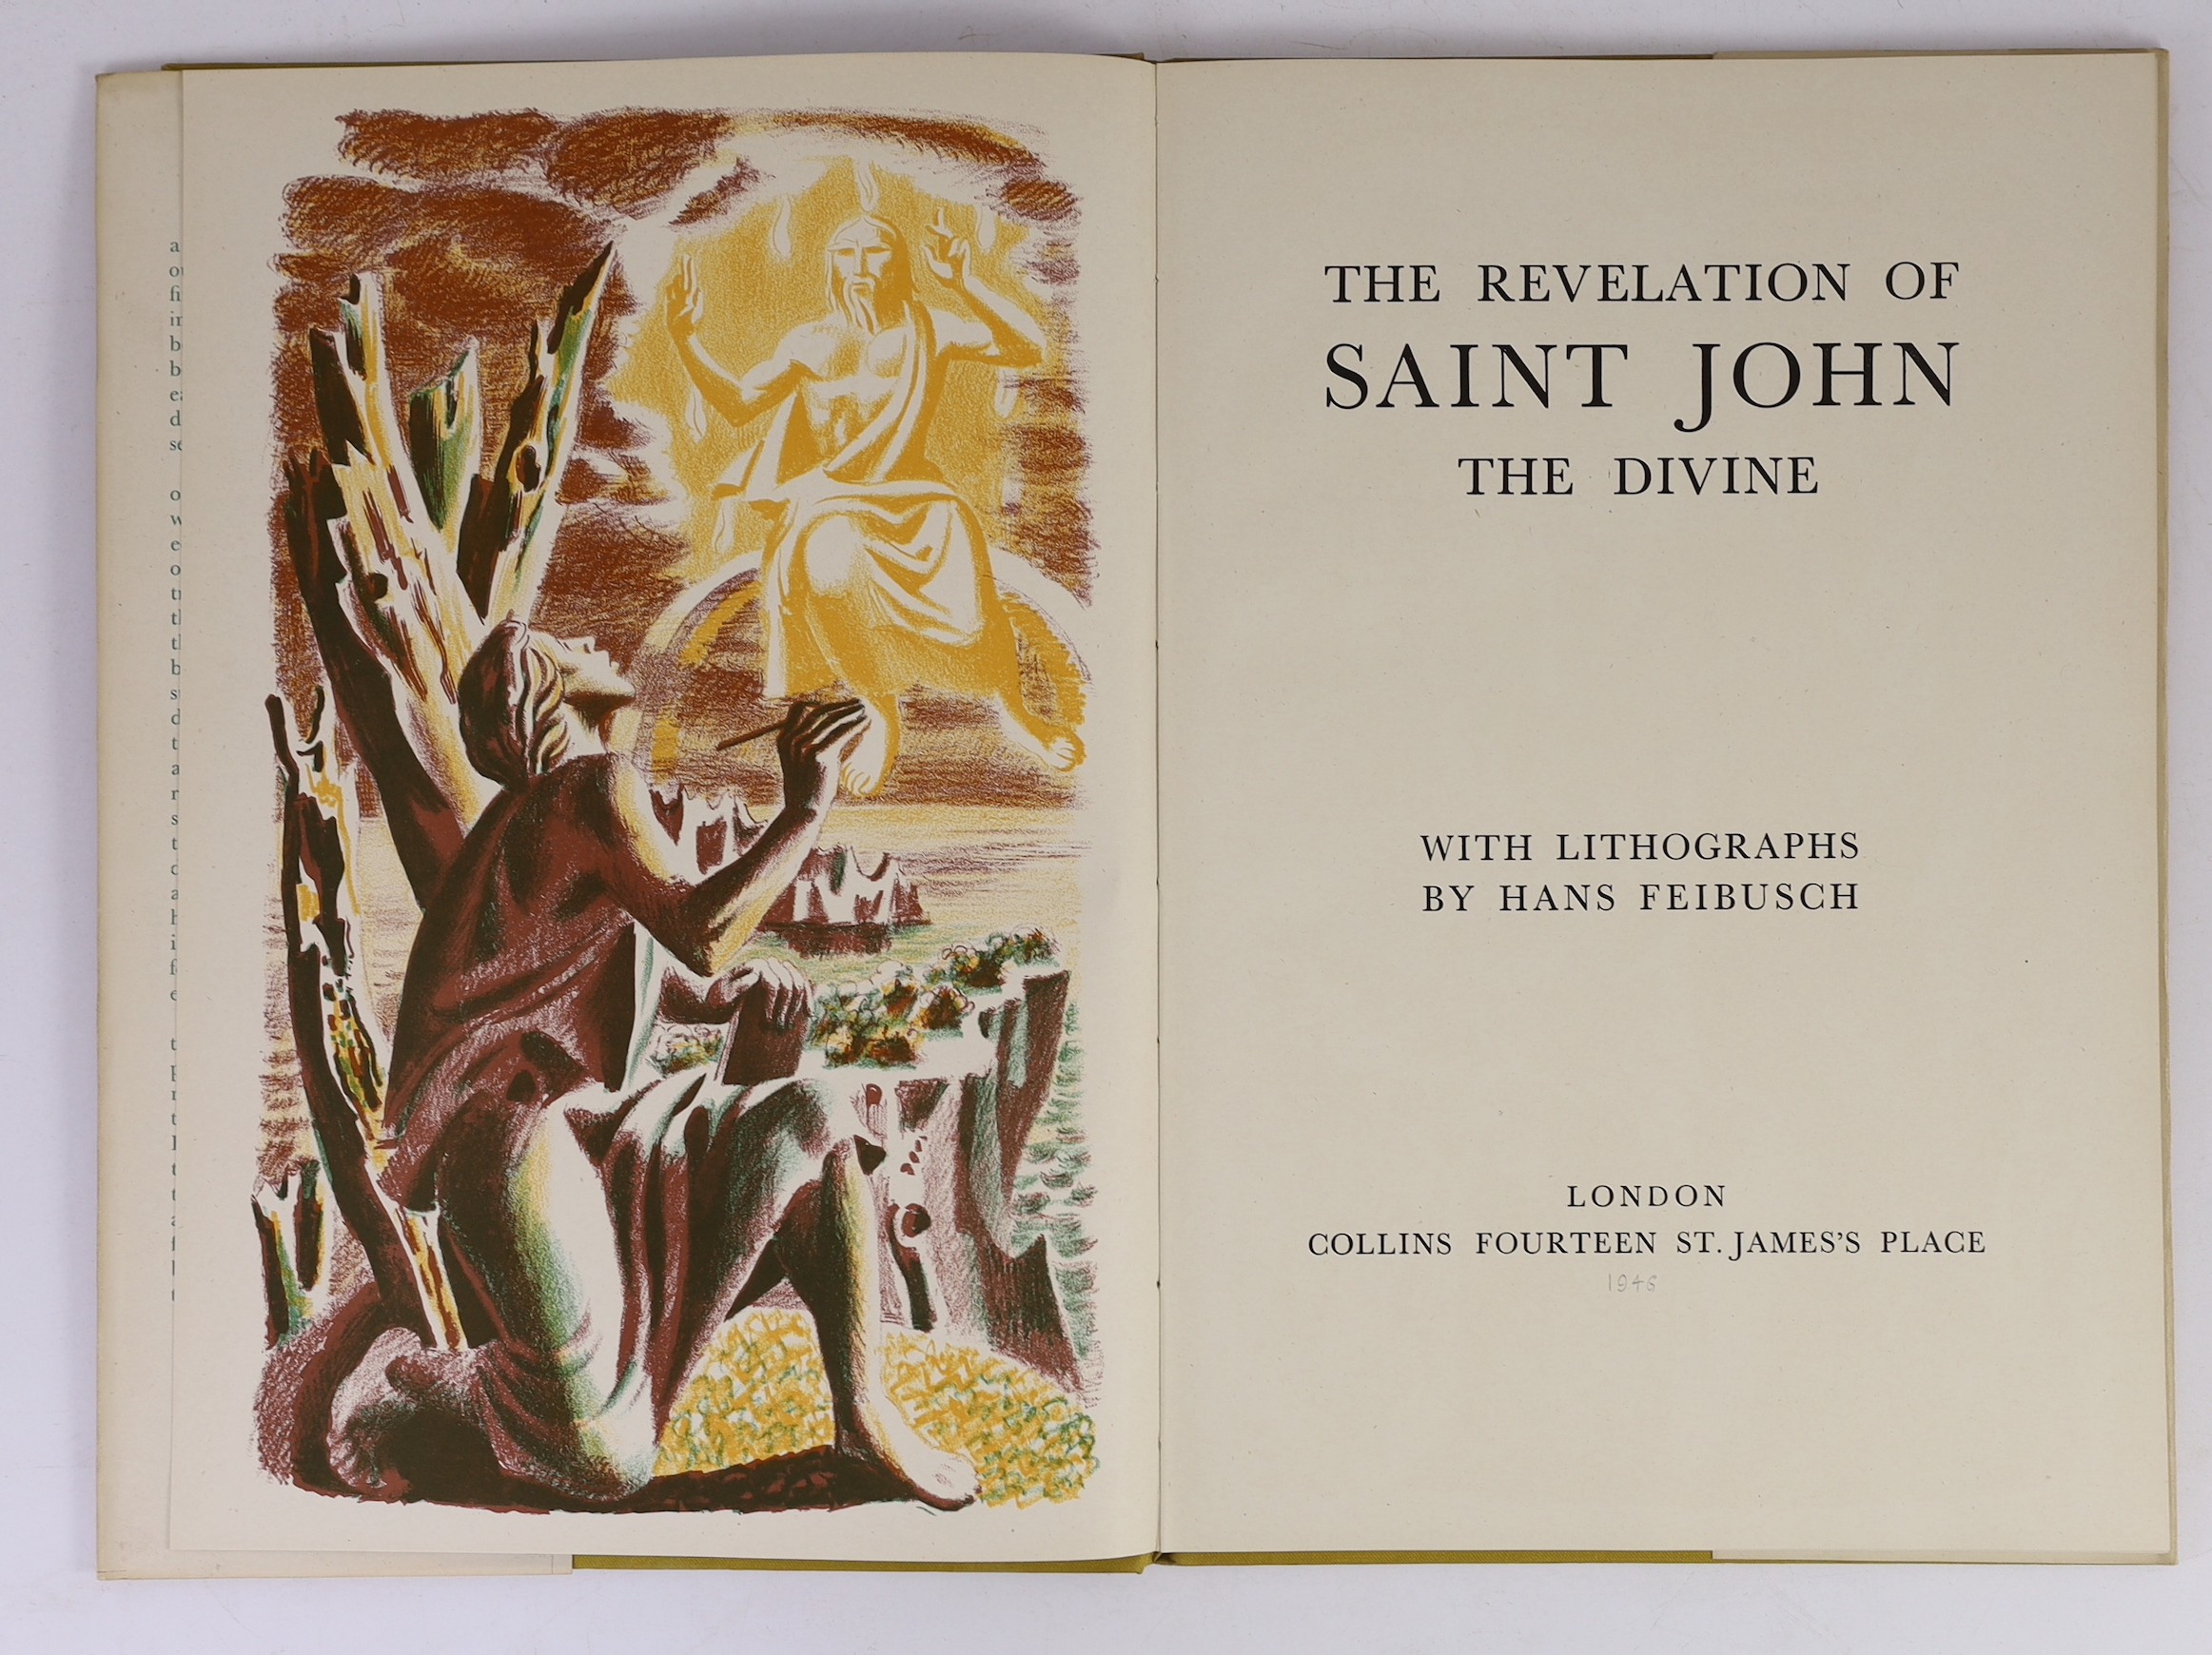 Feibusch, Hans (illustrator) - The Revelation of Saint John the Devine, folio, cloth with unclipped d/j, with 21 full page lithographs, Collins, London, [1946]